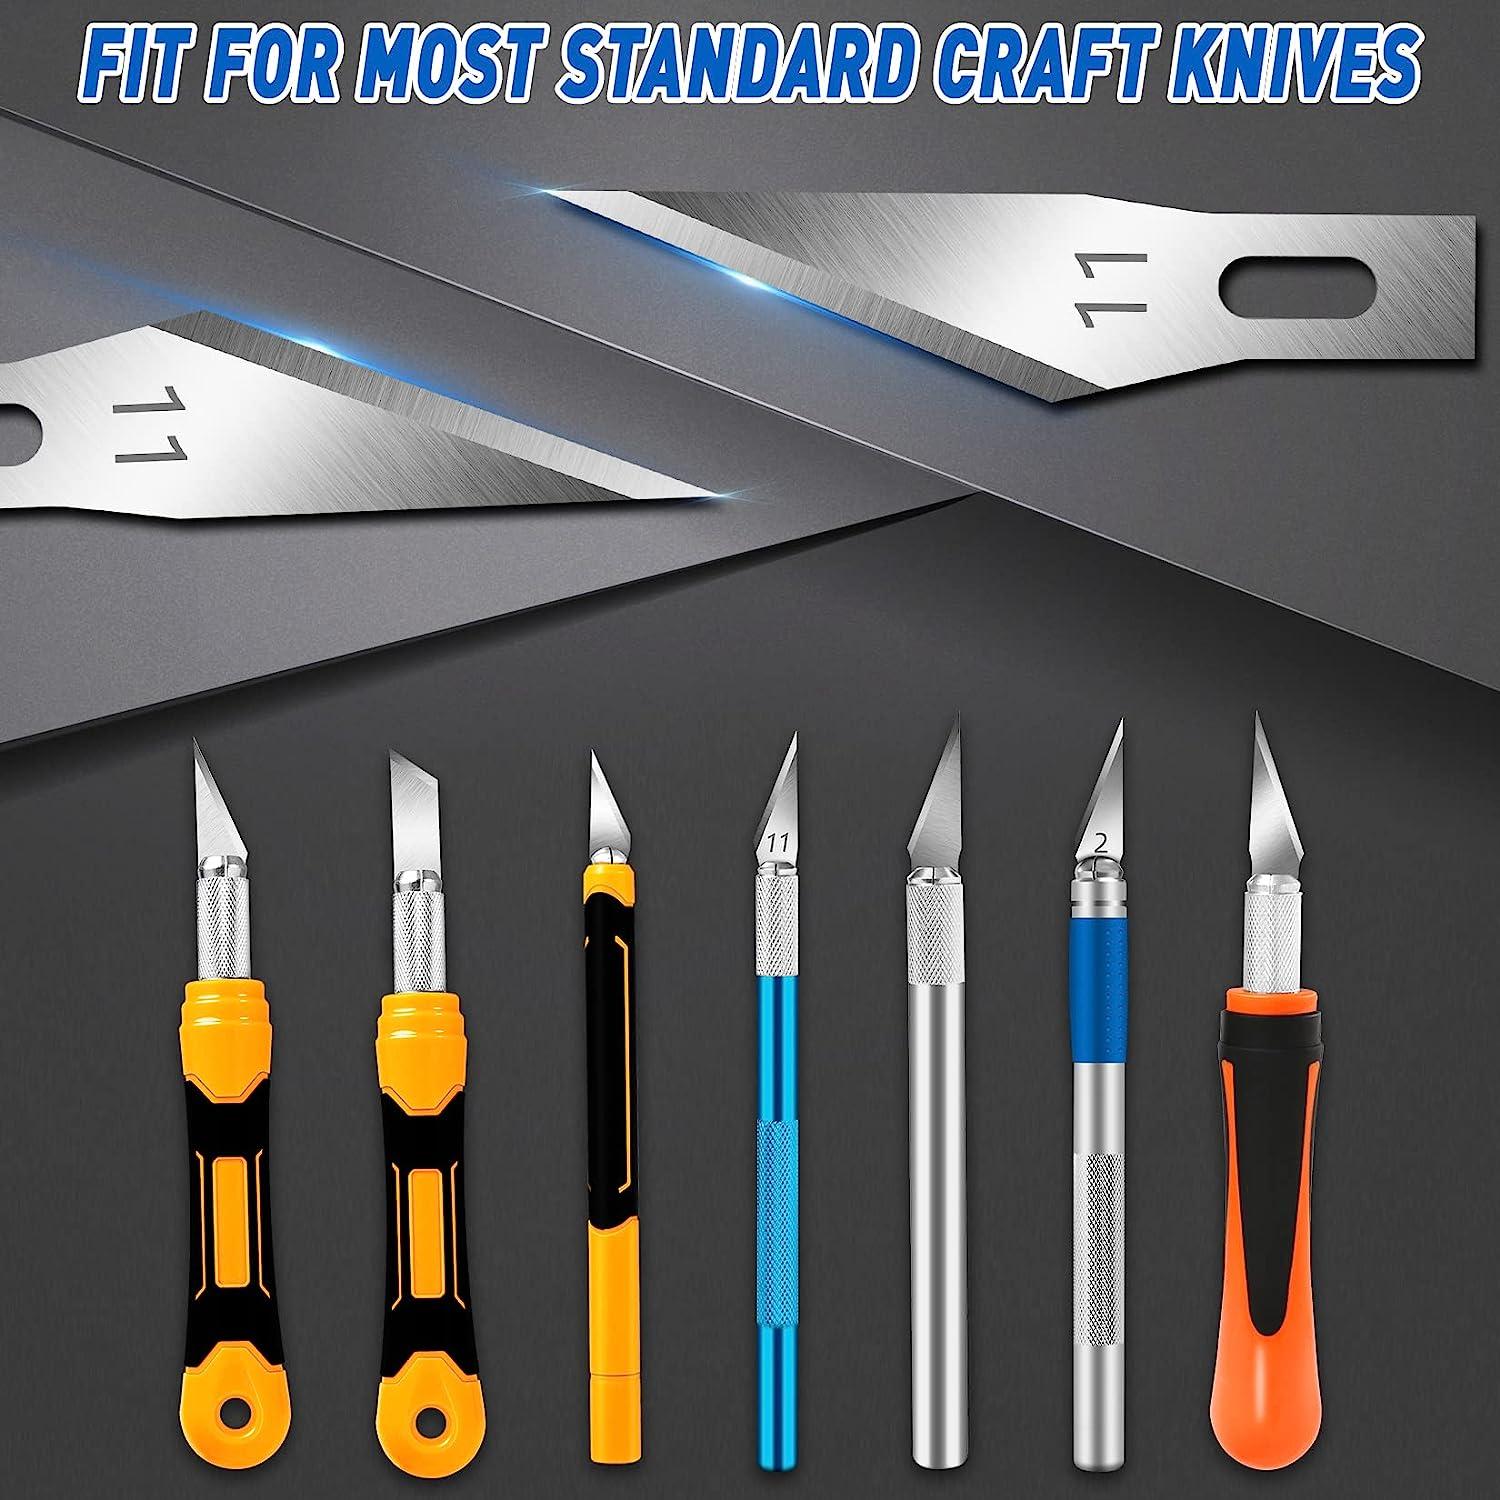 Art Knives and Blades